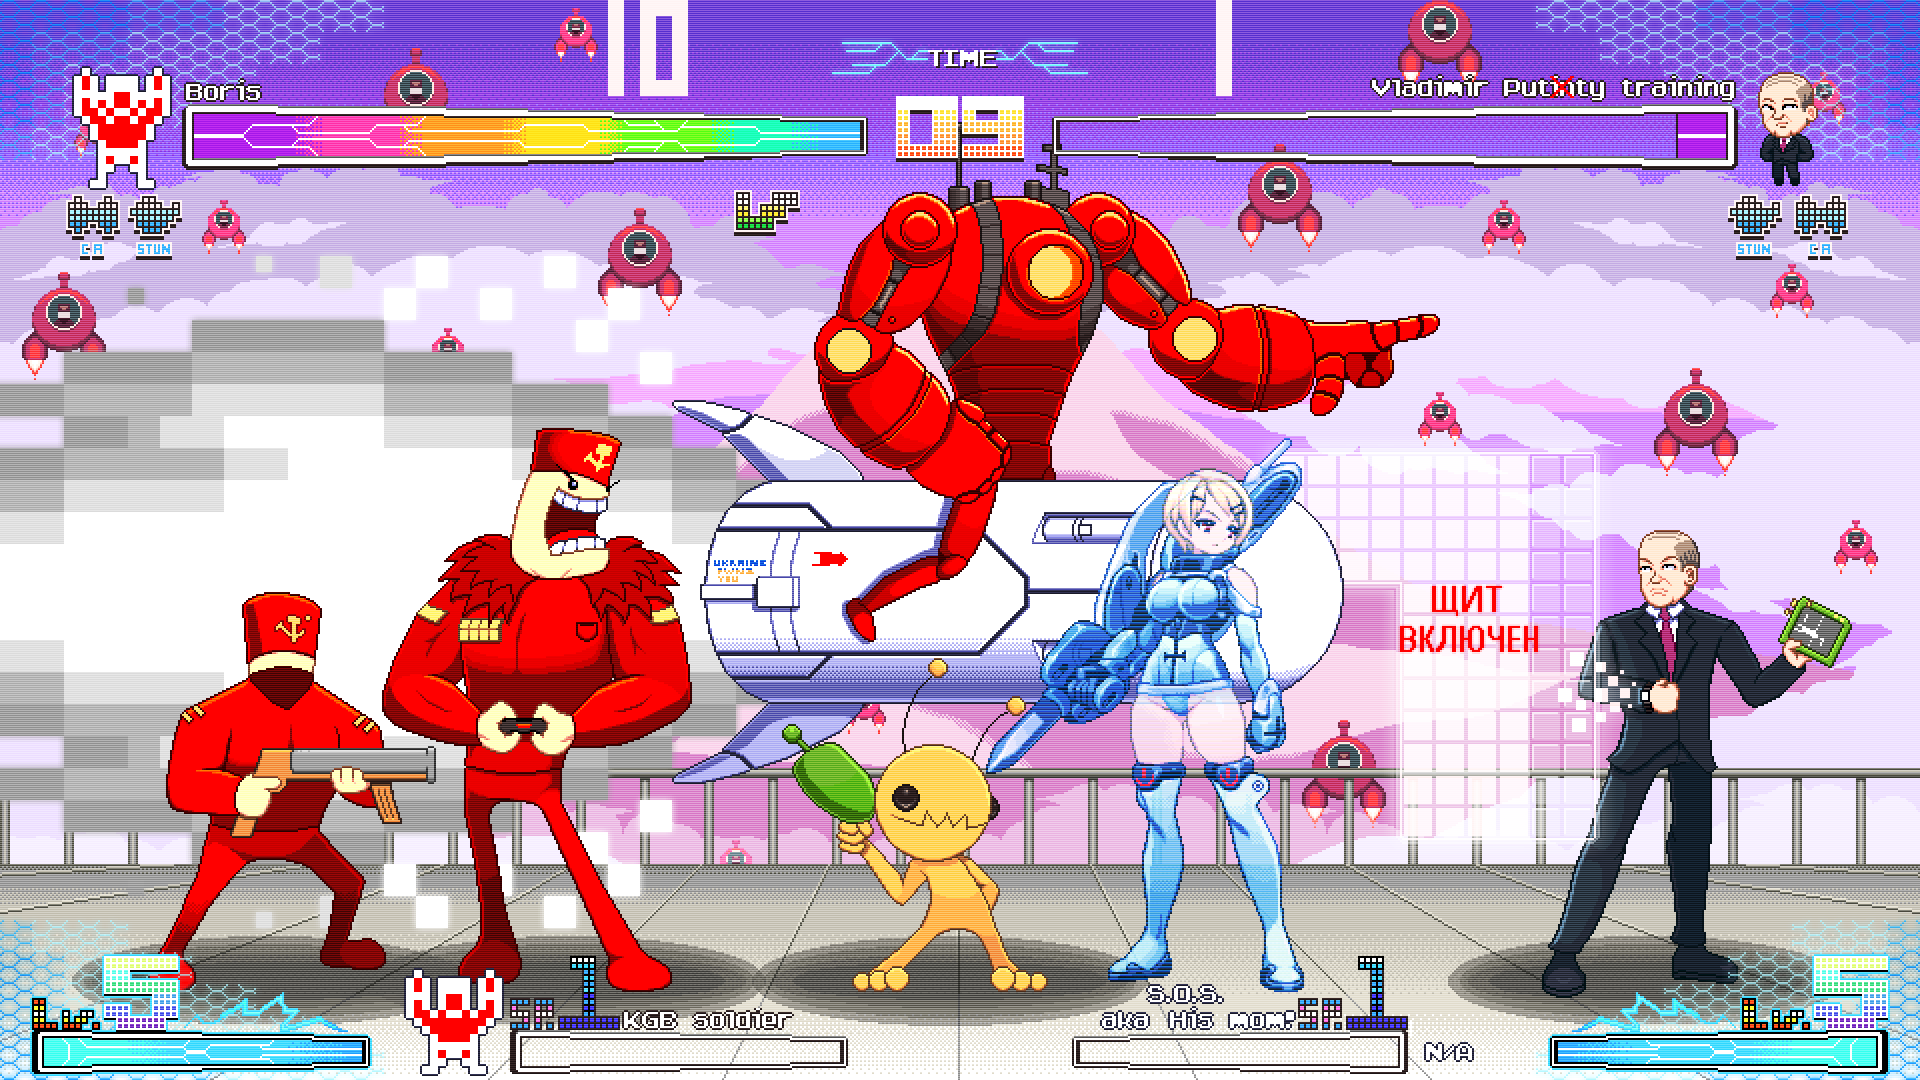 Madness Combat fighting game by ScepterDPinoy on Newgrounds